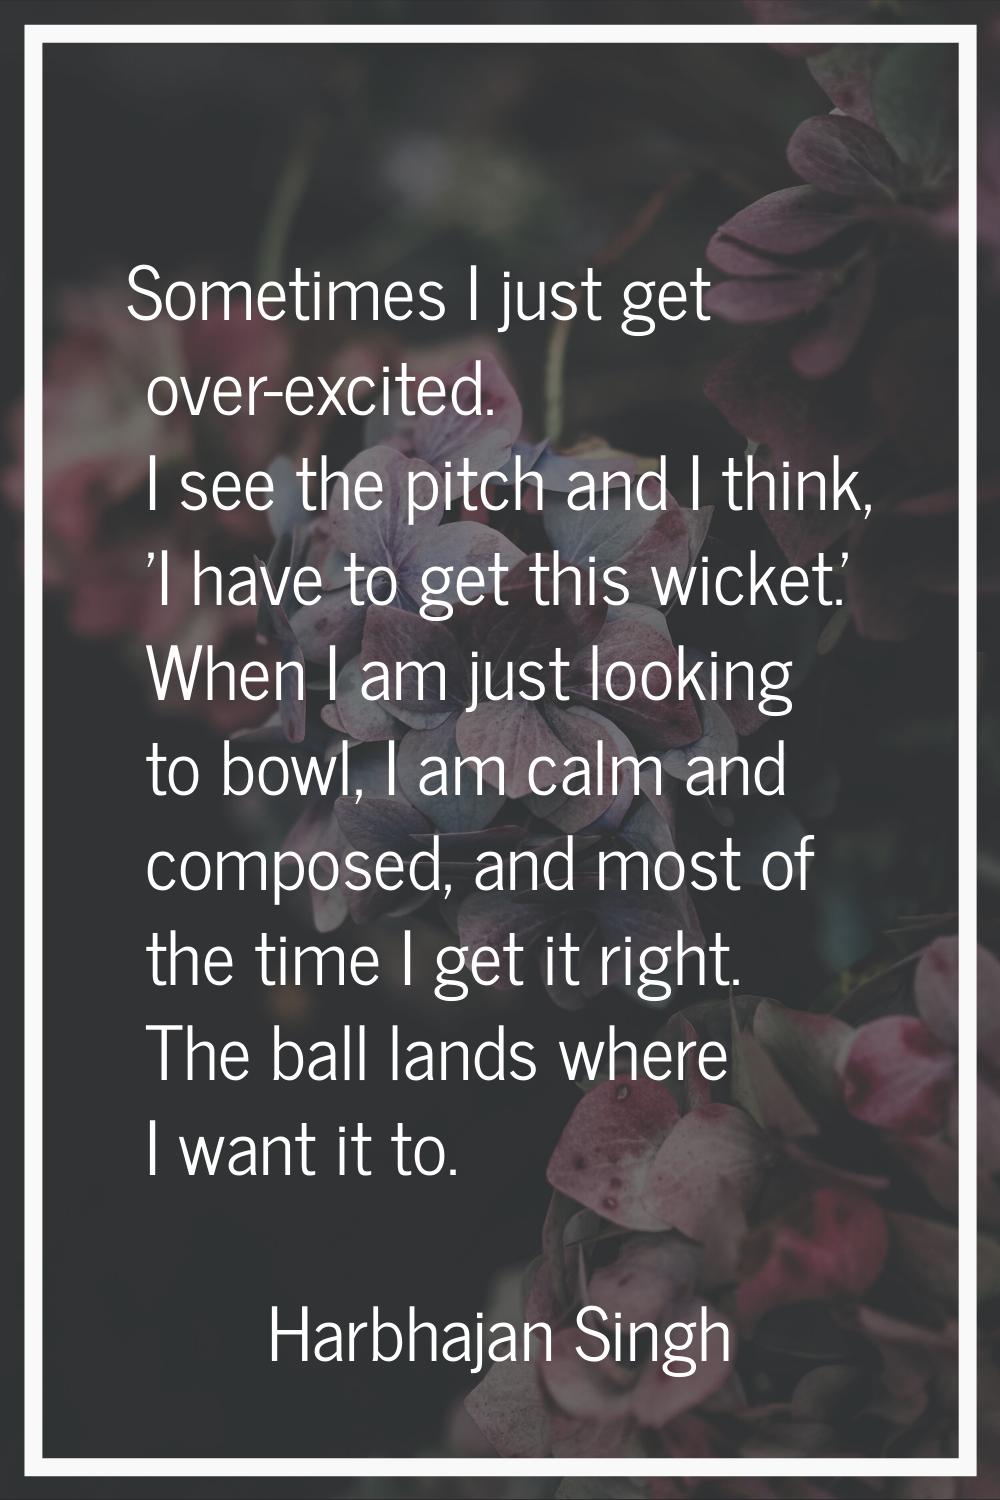 Sometimes I just get over-excited. I see the pitch and I think, 'I have to get this wicket.' When I